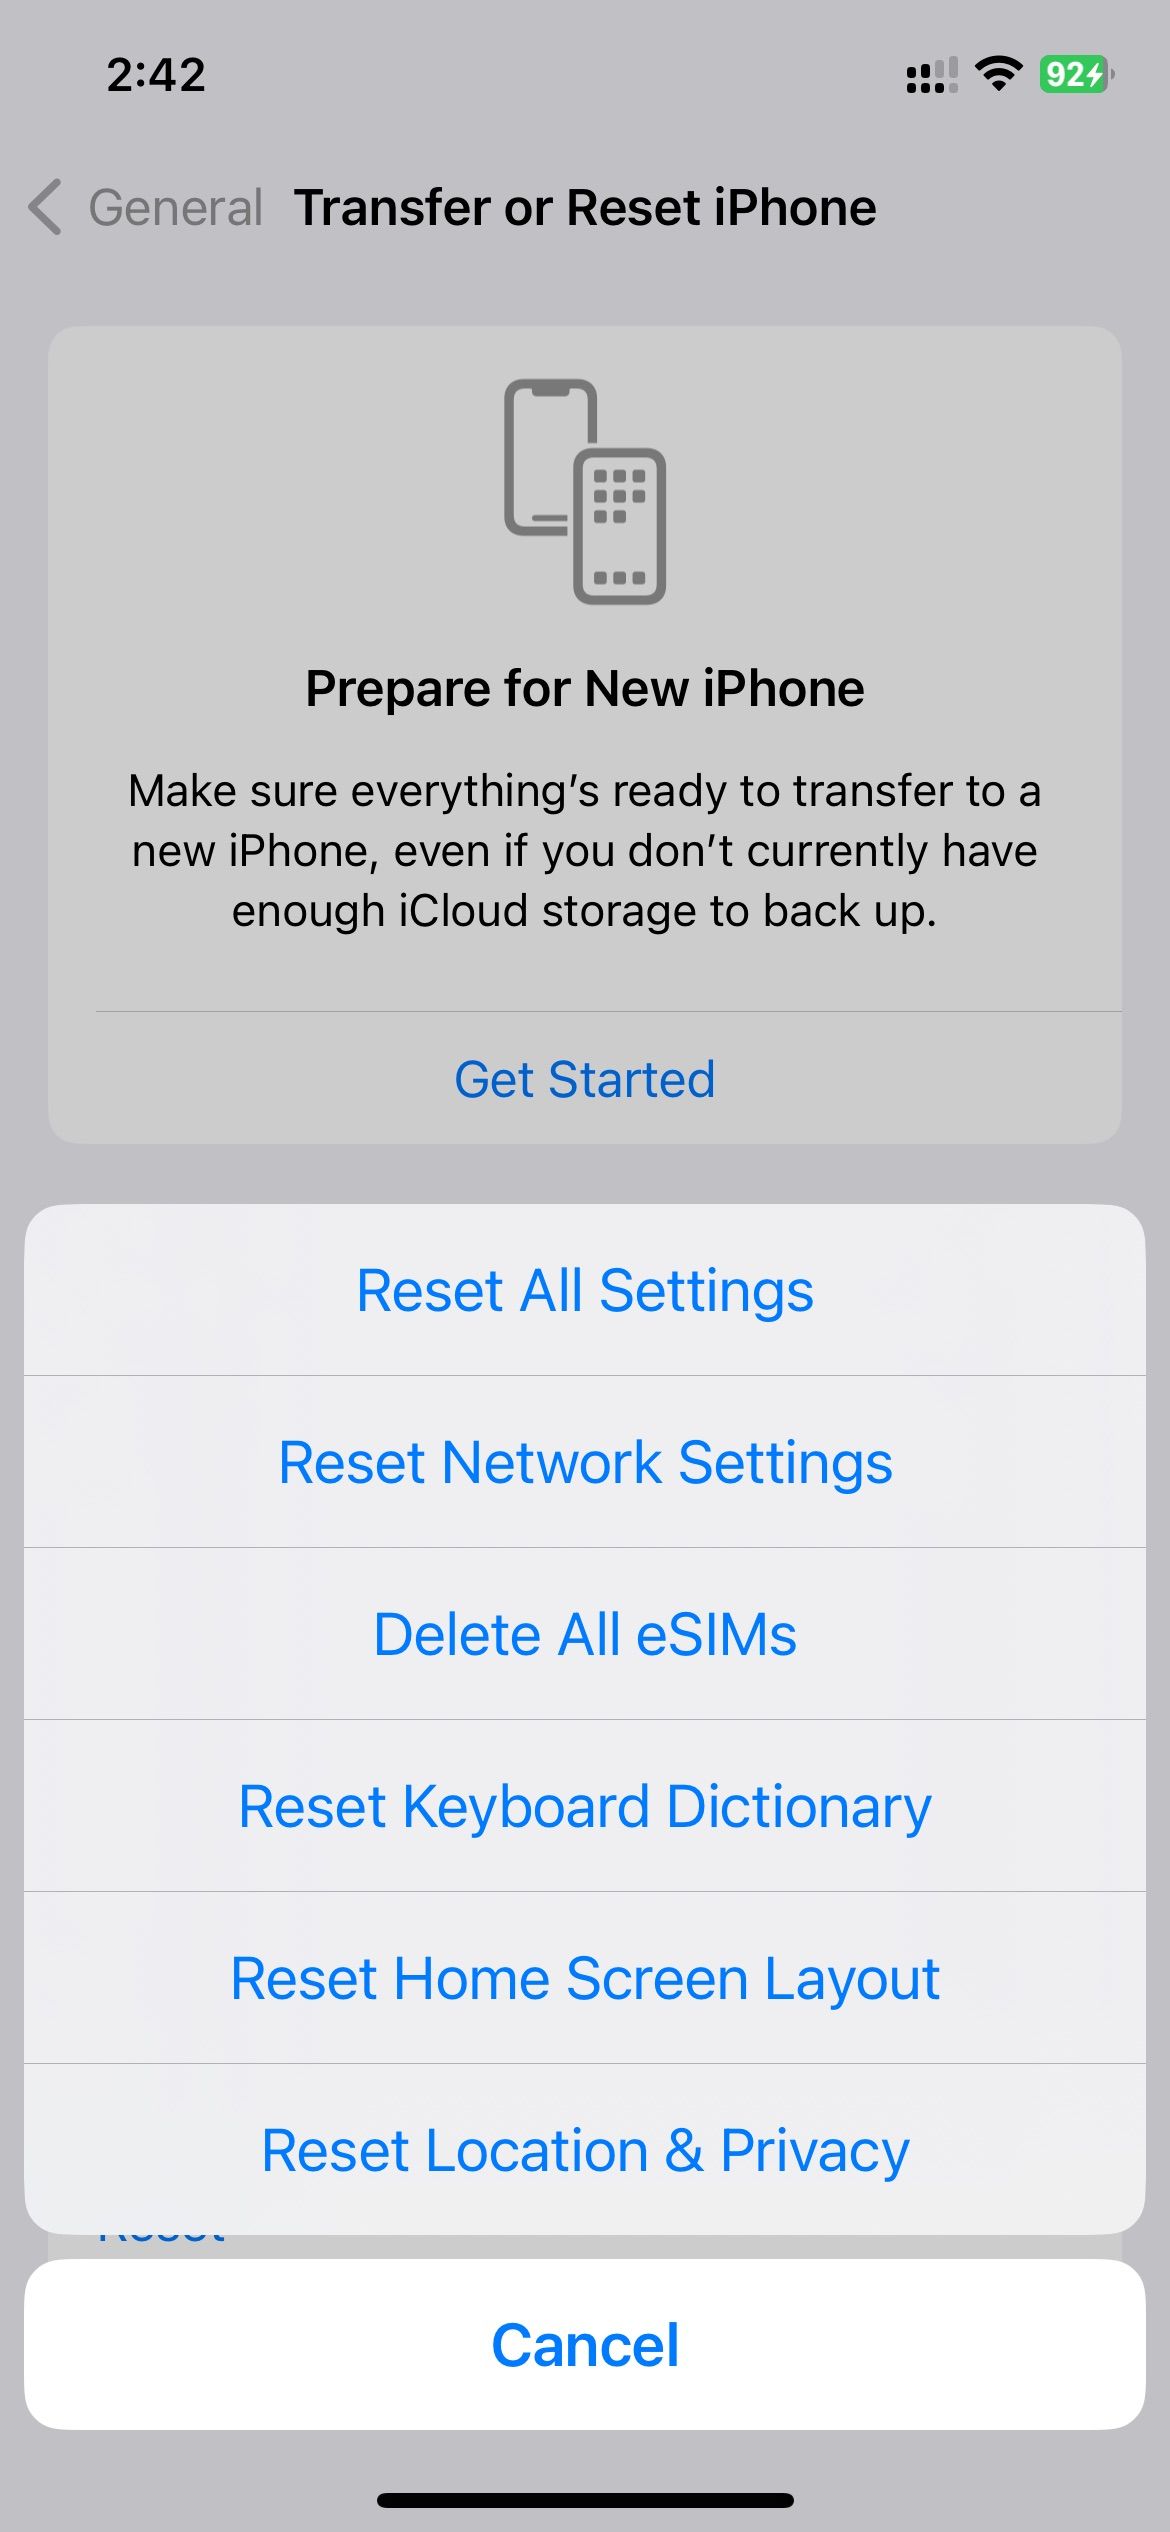 All settings Reset options in iOS